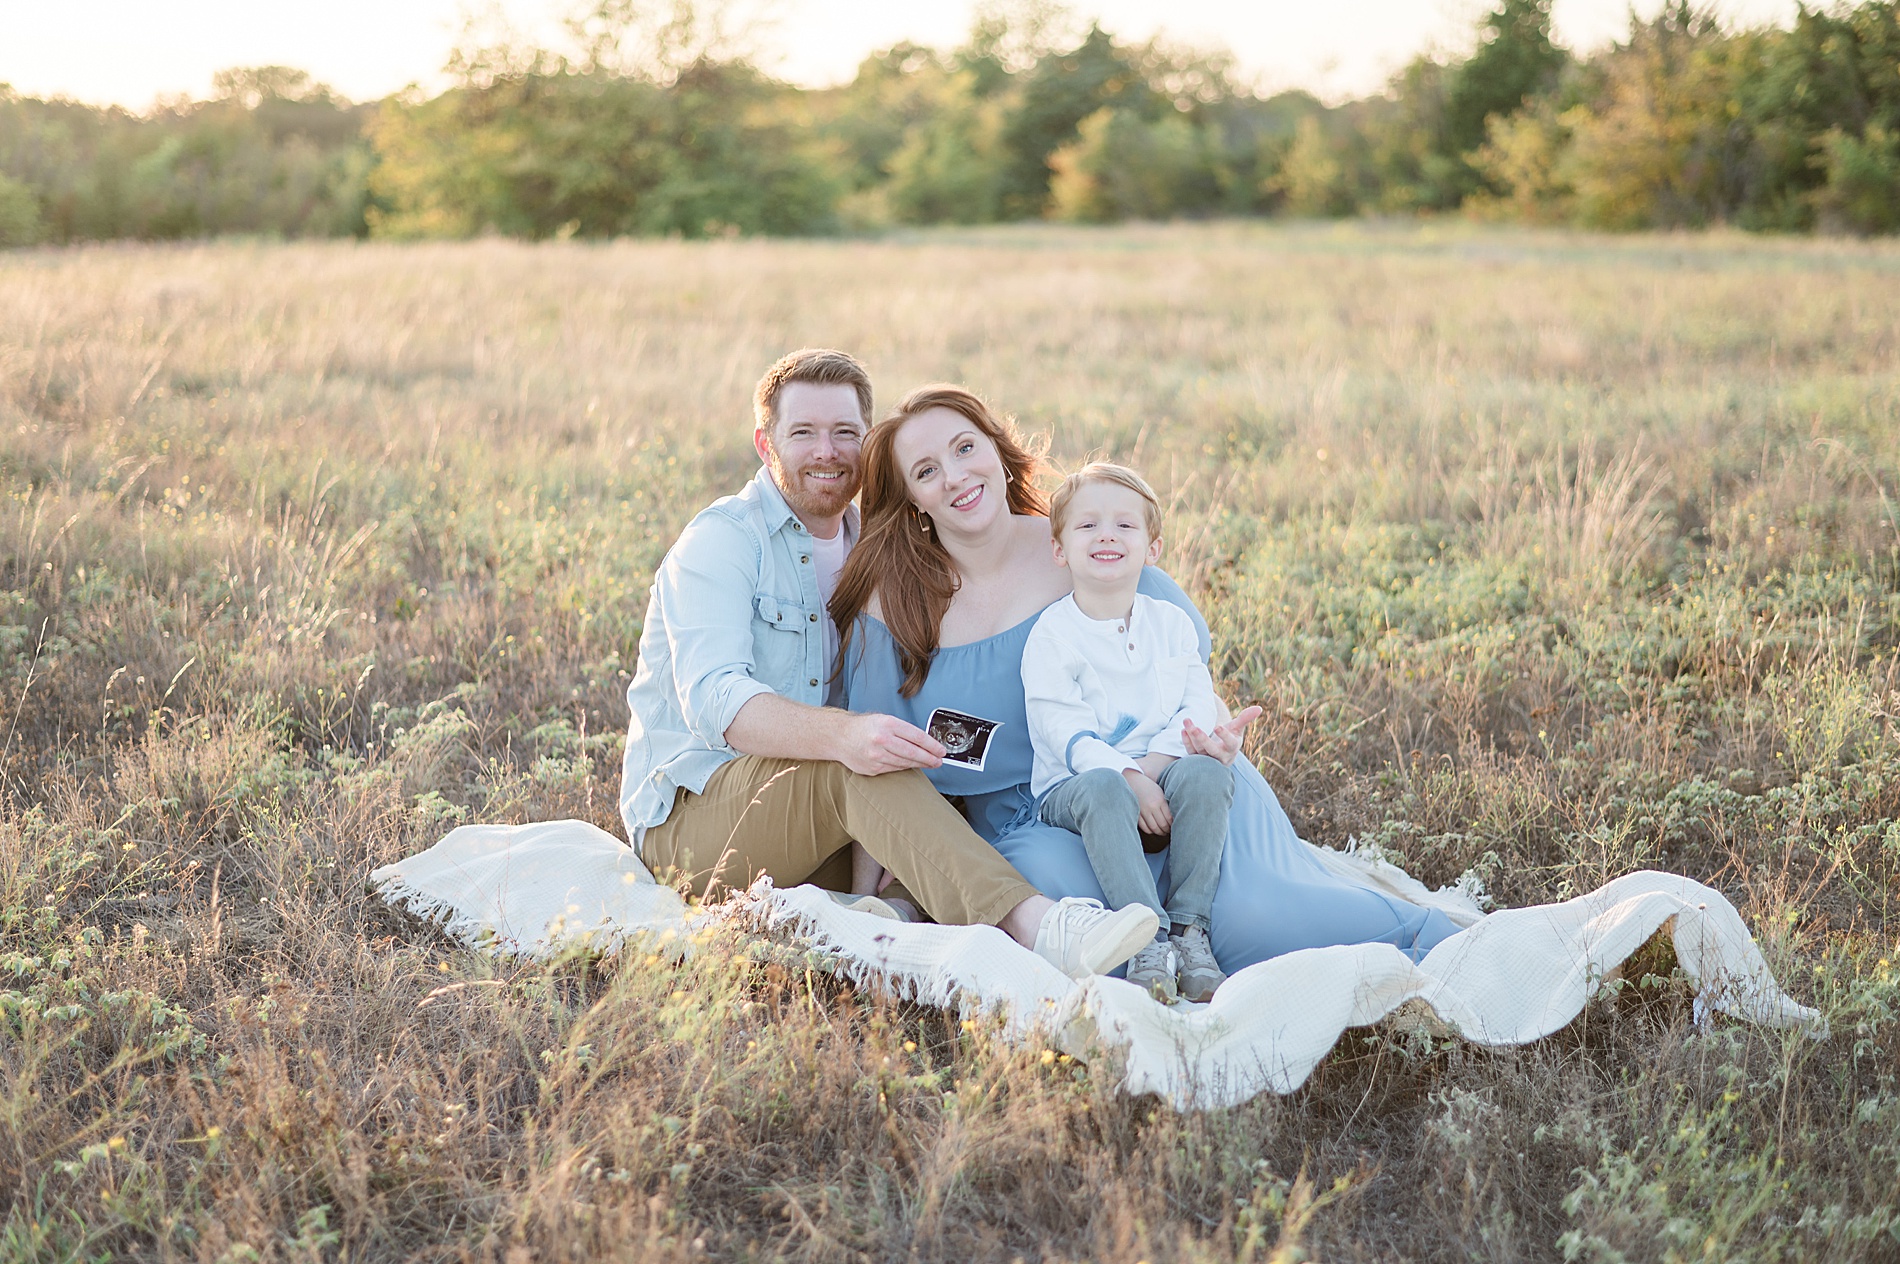 Family sitting in field holding sonogram photographed by Lindsey Dutton Photography, a Dallas maternity photographer
